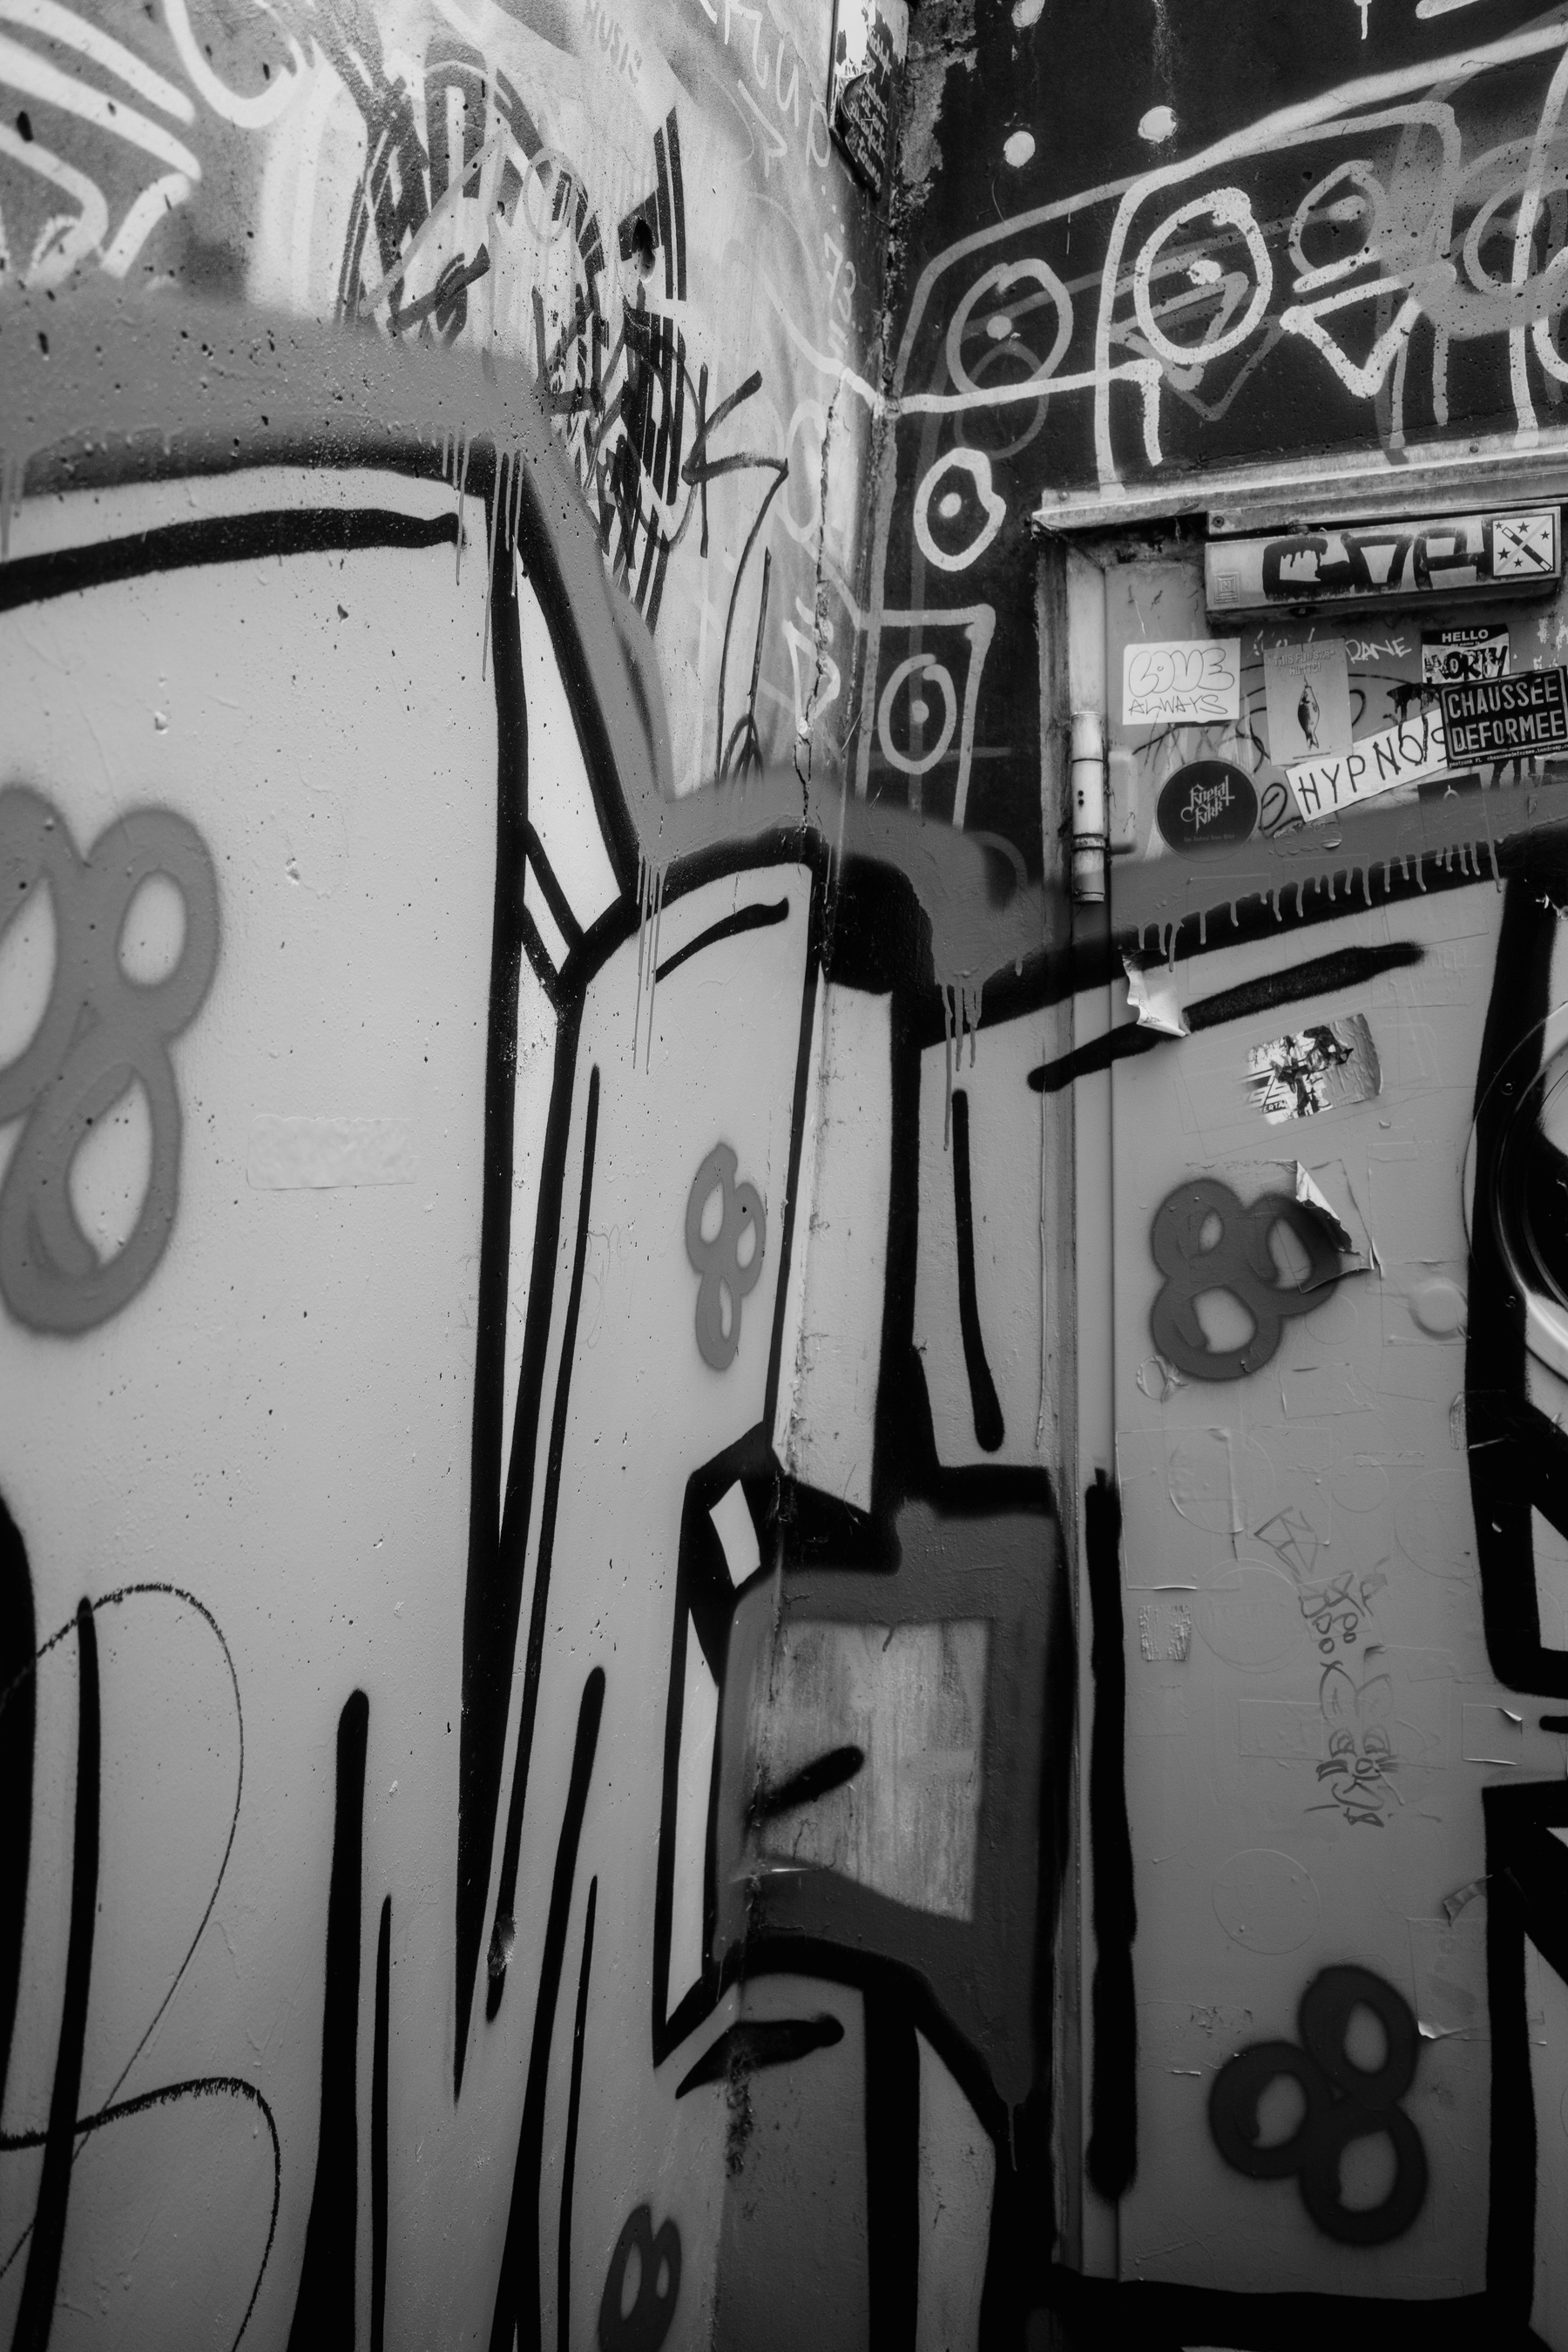 Black and white photo of a wall covered with various graffiti tags and stickers.